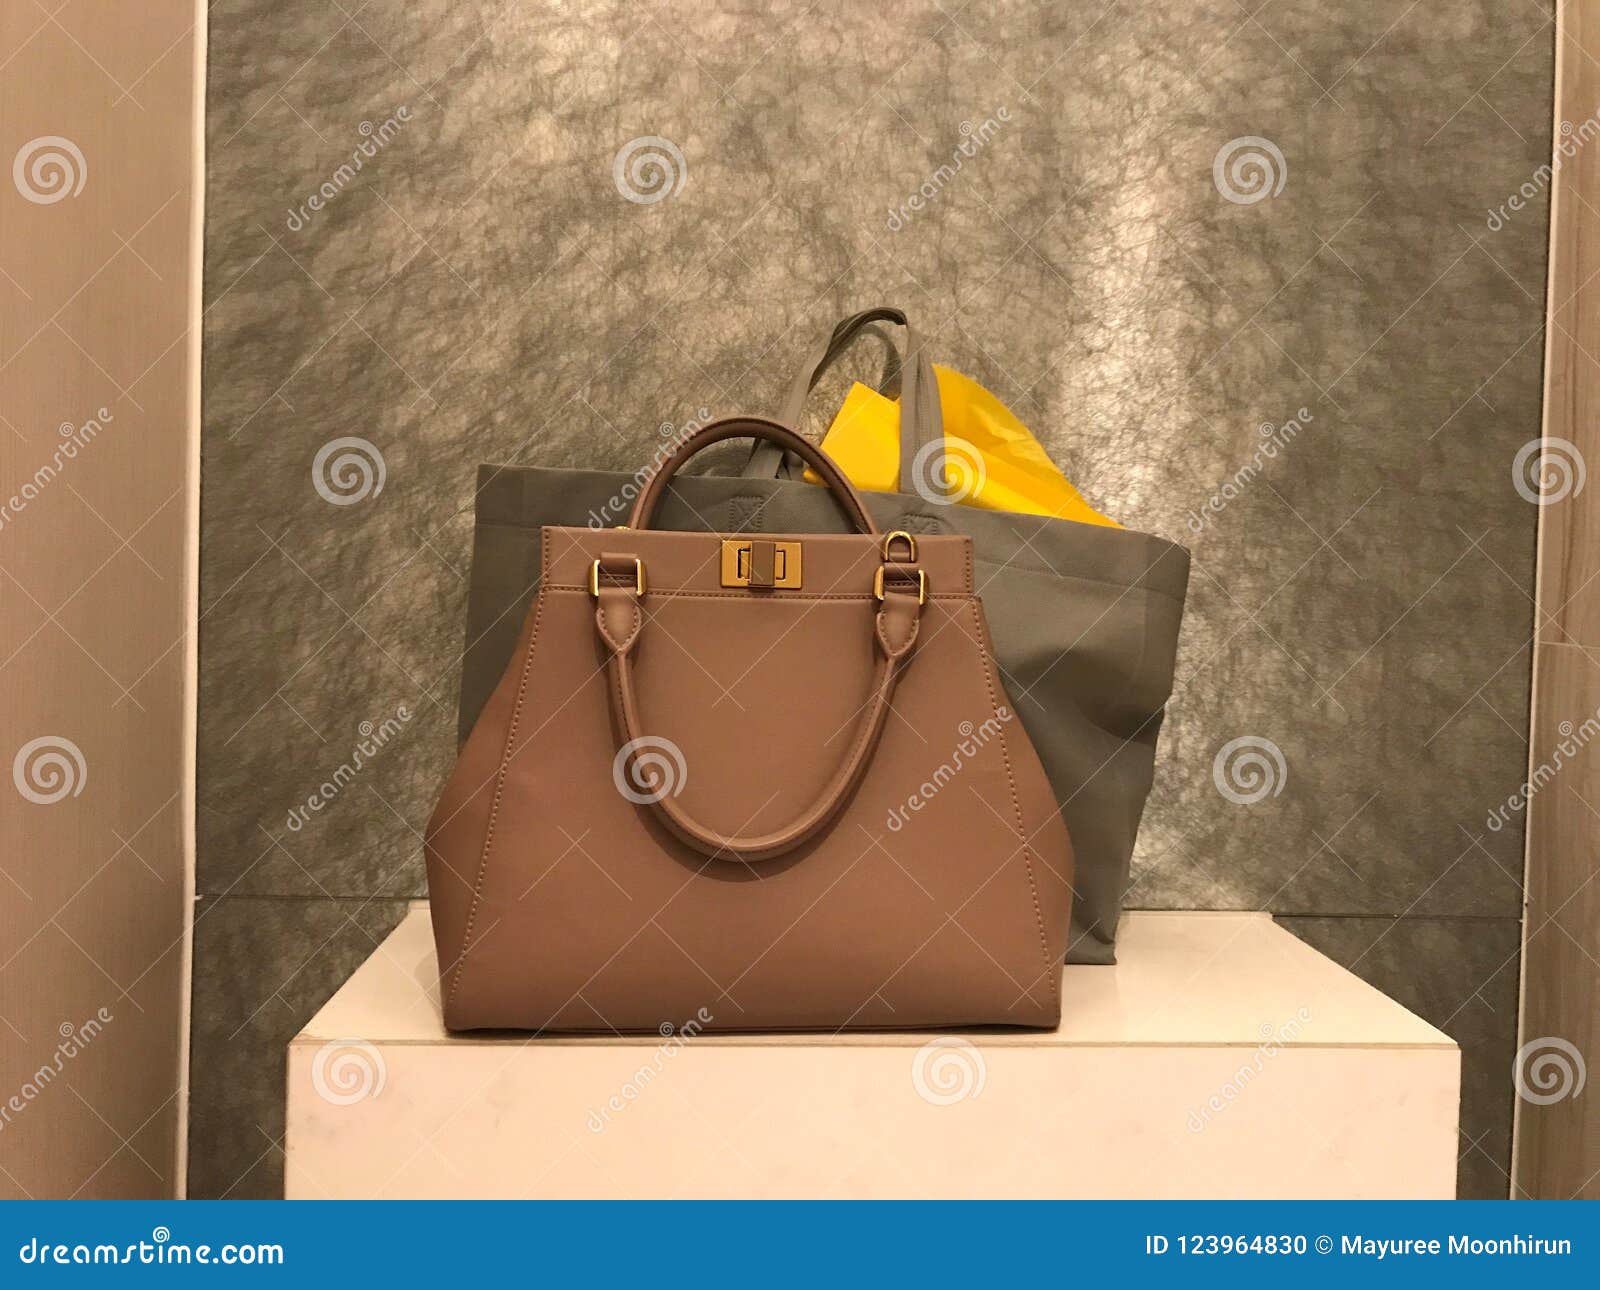 Women Leather Handbag with Shopping Bags Stock Photo - Image of object ...